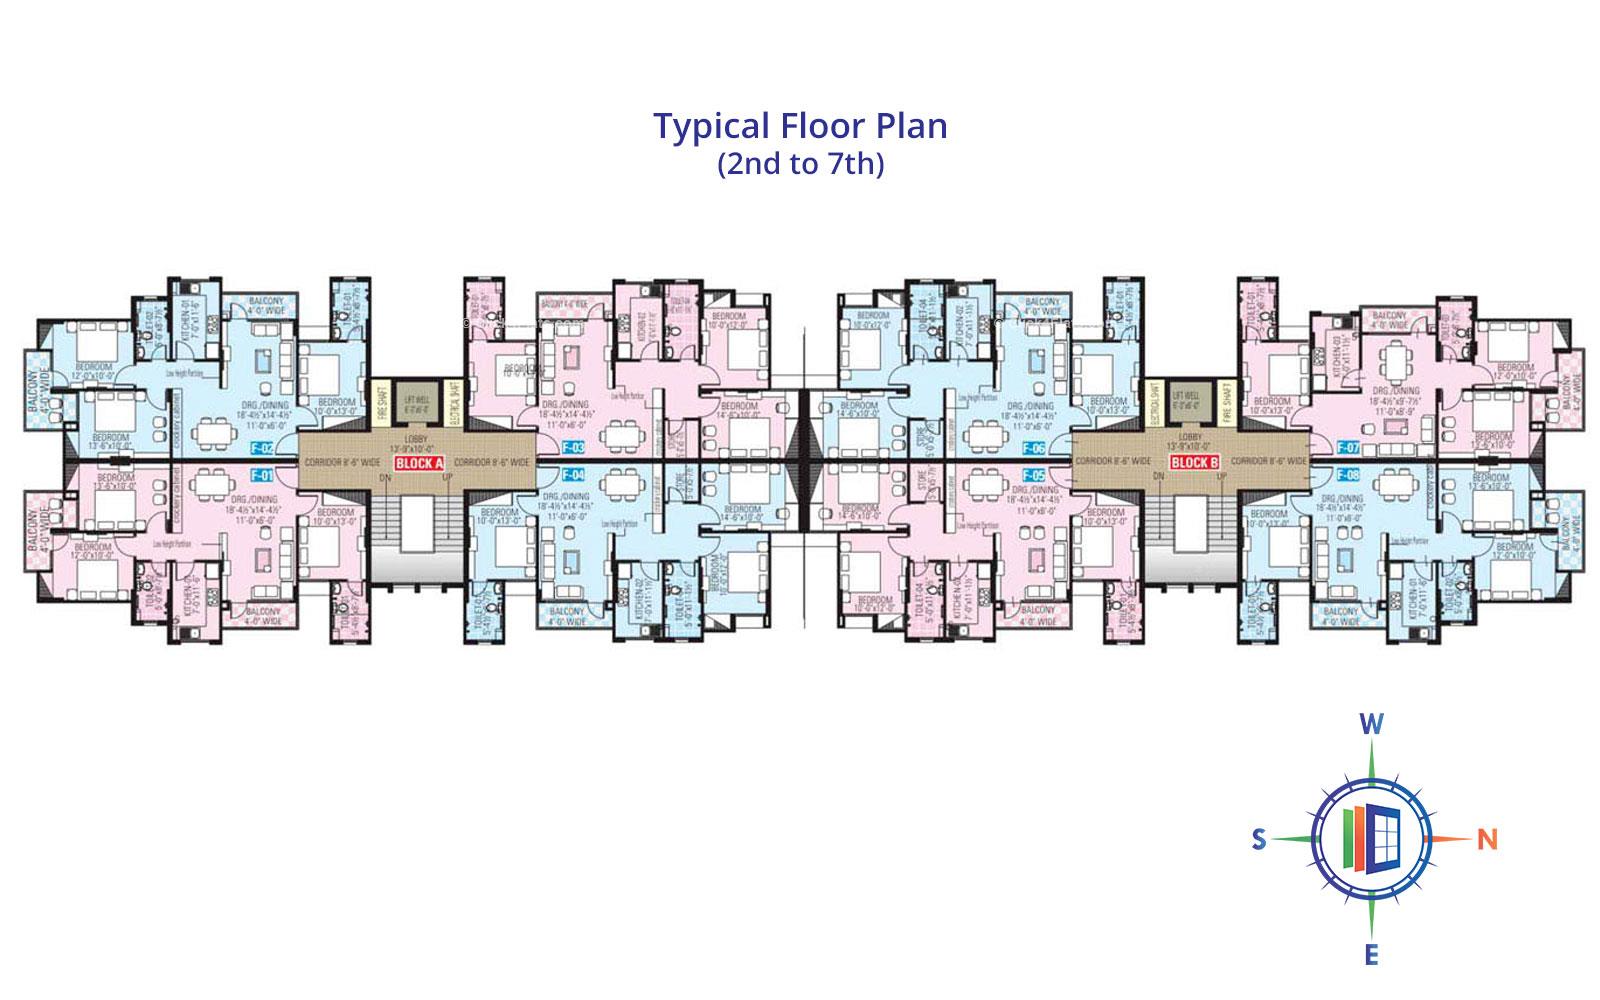 Sunshine Symphony Typical Floor Plan (2nd to 7th)